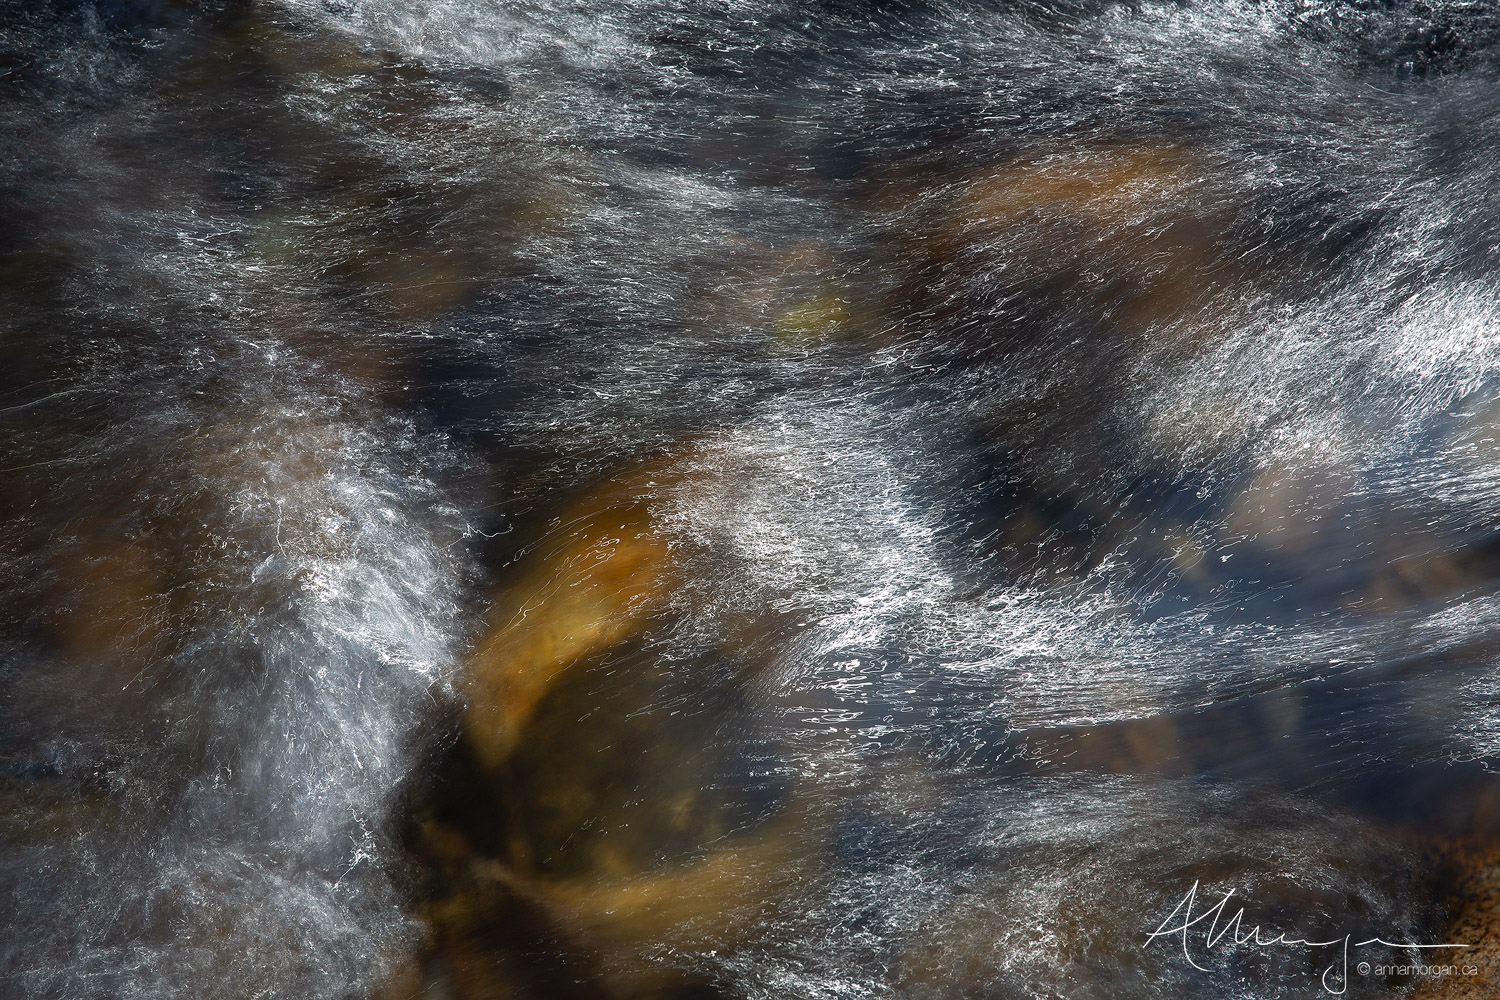 Fast moving water in an alpine creek in the Eastern Sierra glistens in the midday sun creating wonderful patterns on its surface